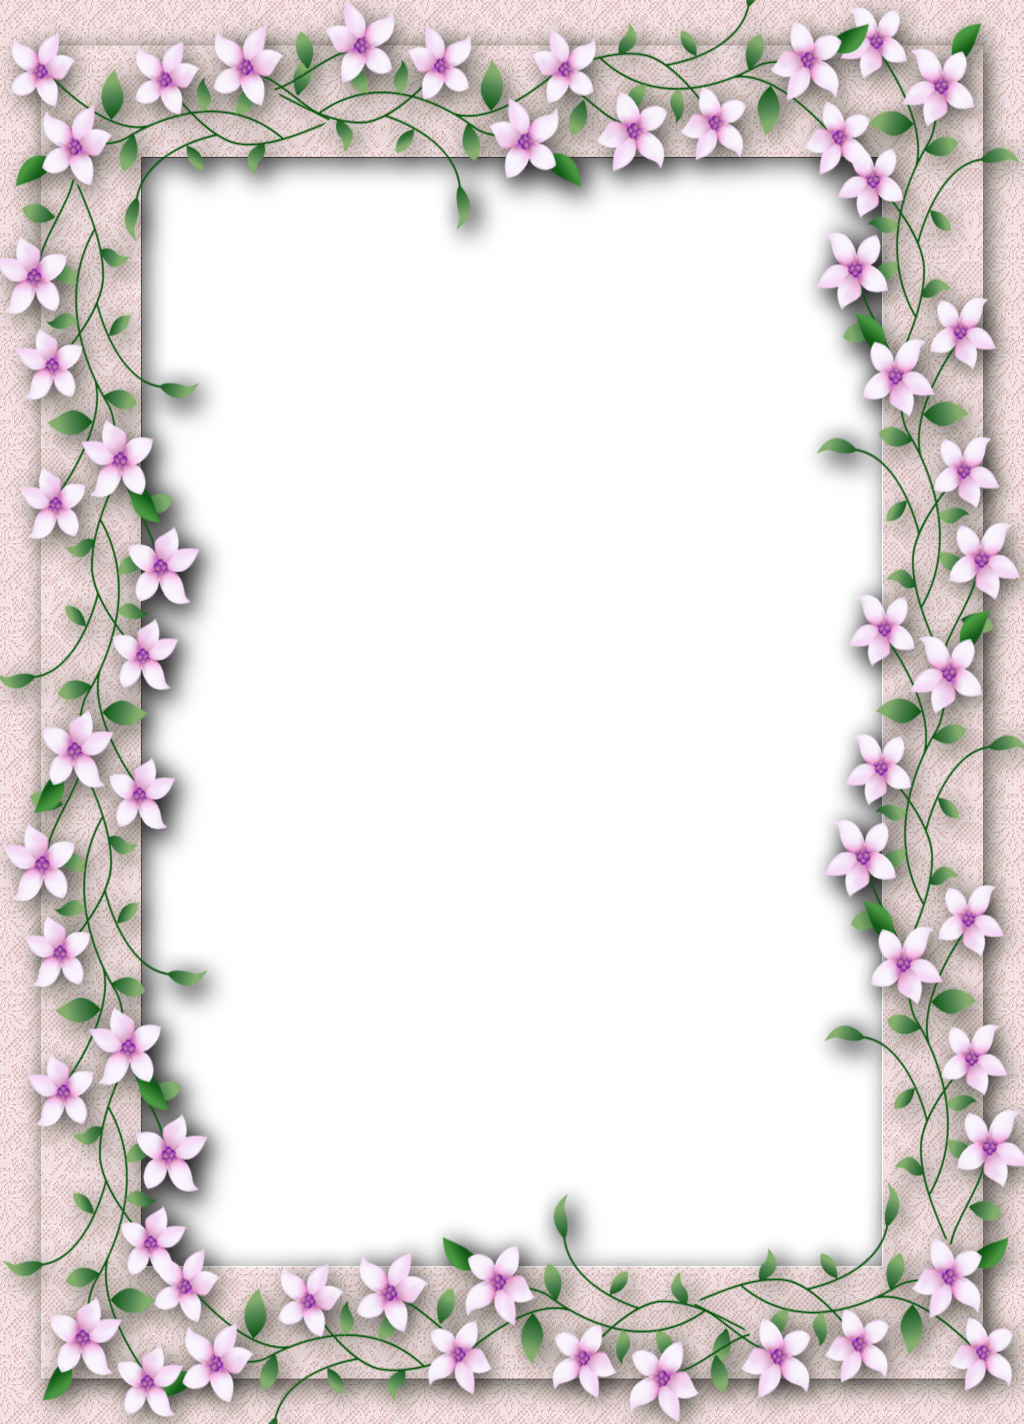 Delicate PNG Transparent Flower Frame | Gallery Yopriceville - High